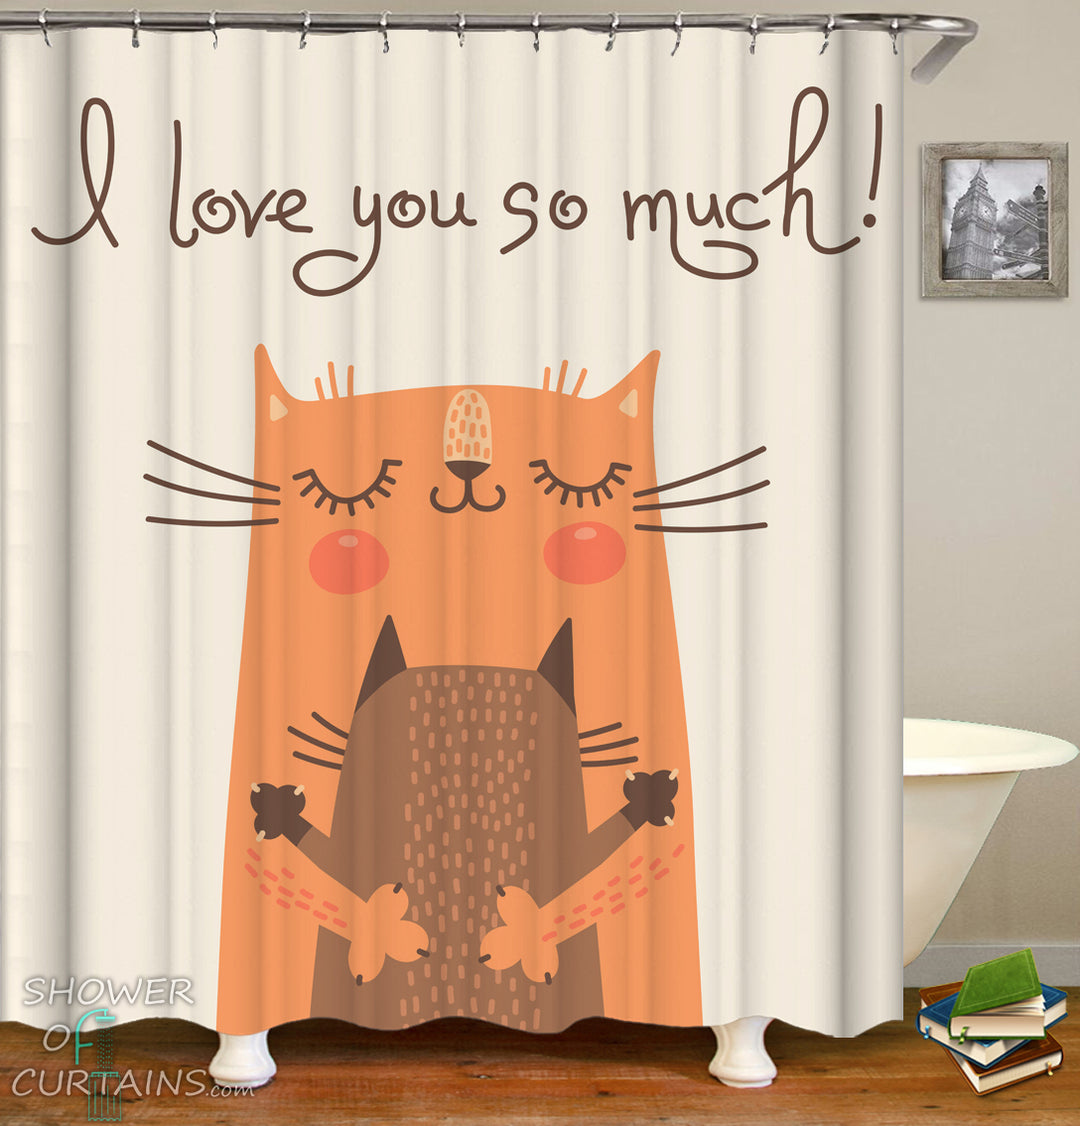 Cat Shower Curtain of Cats Hug - Cute Shower Curtains